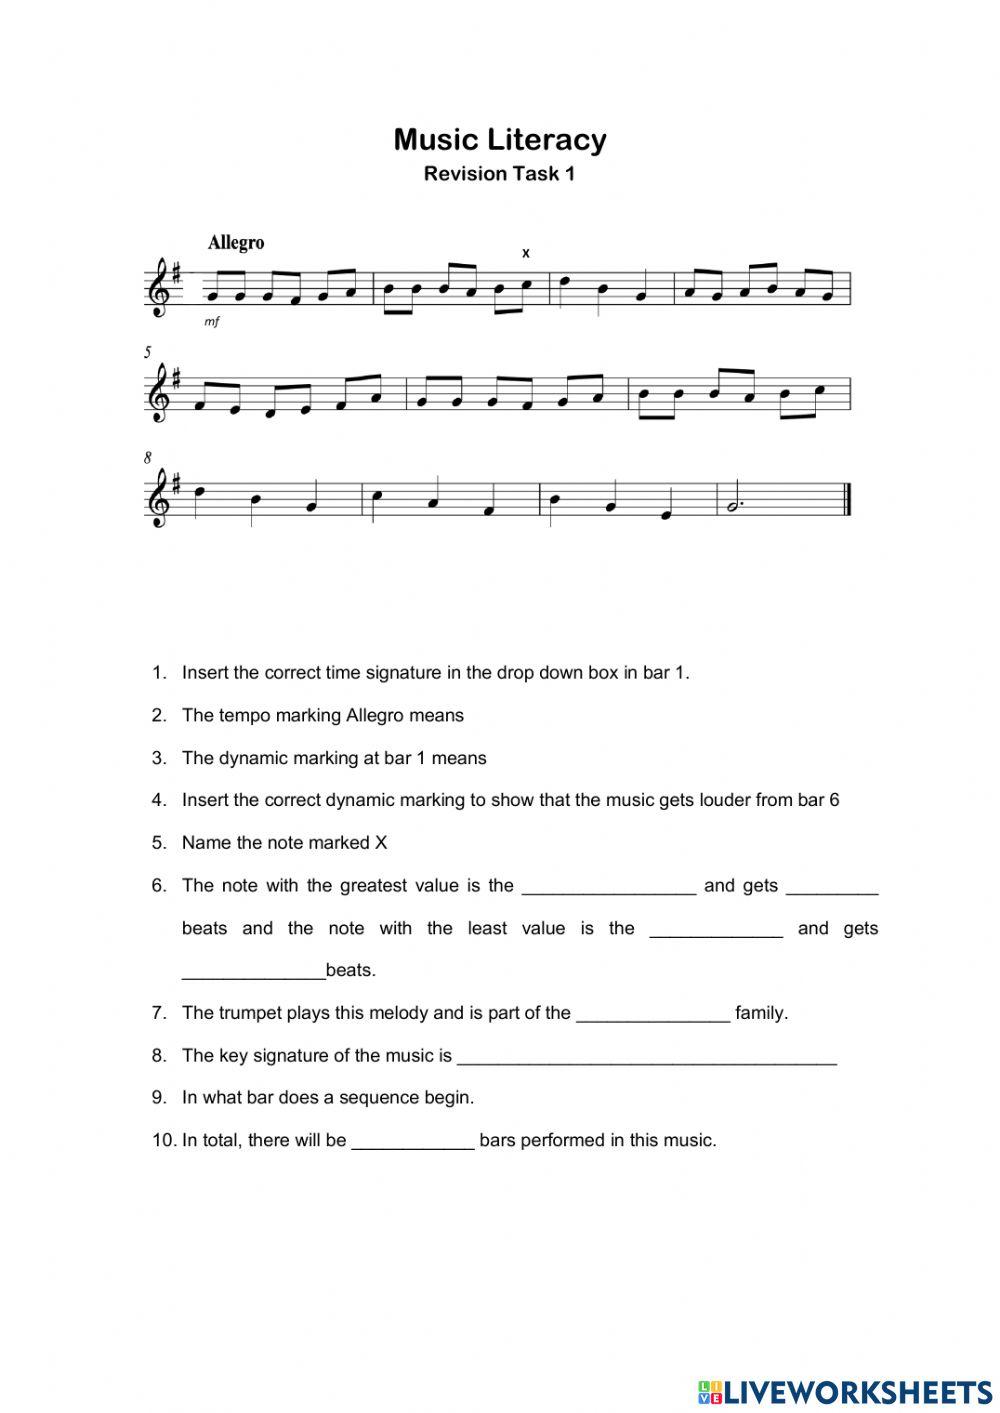 Music Literacy Revision Task 1